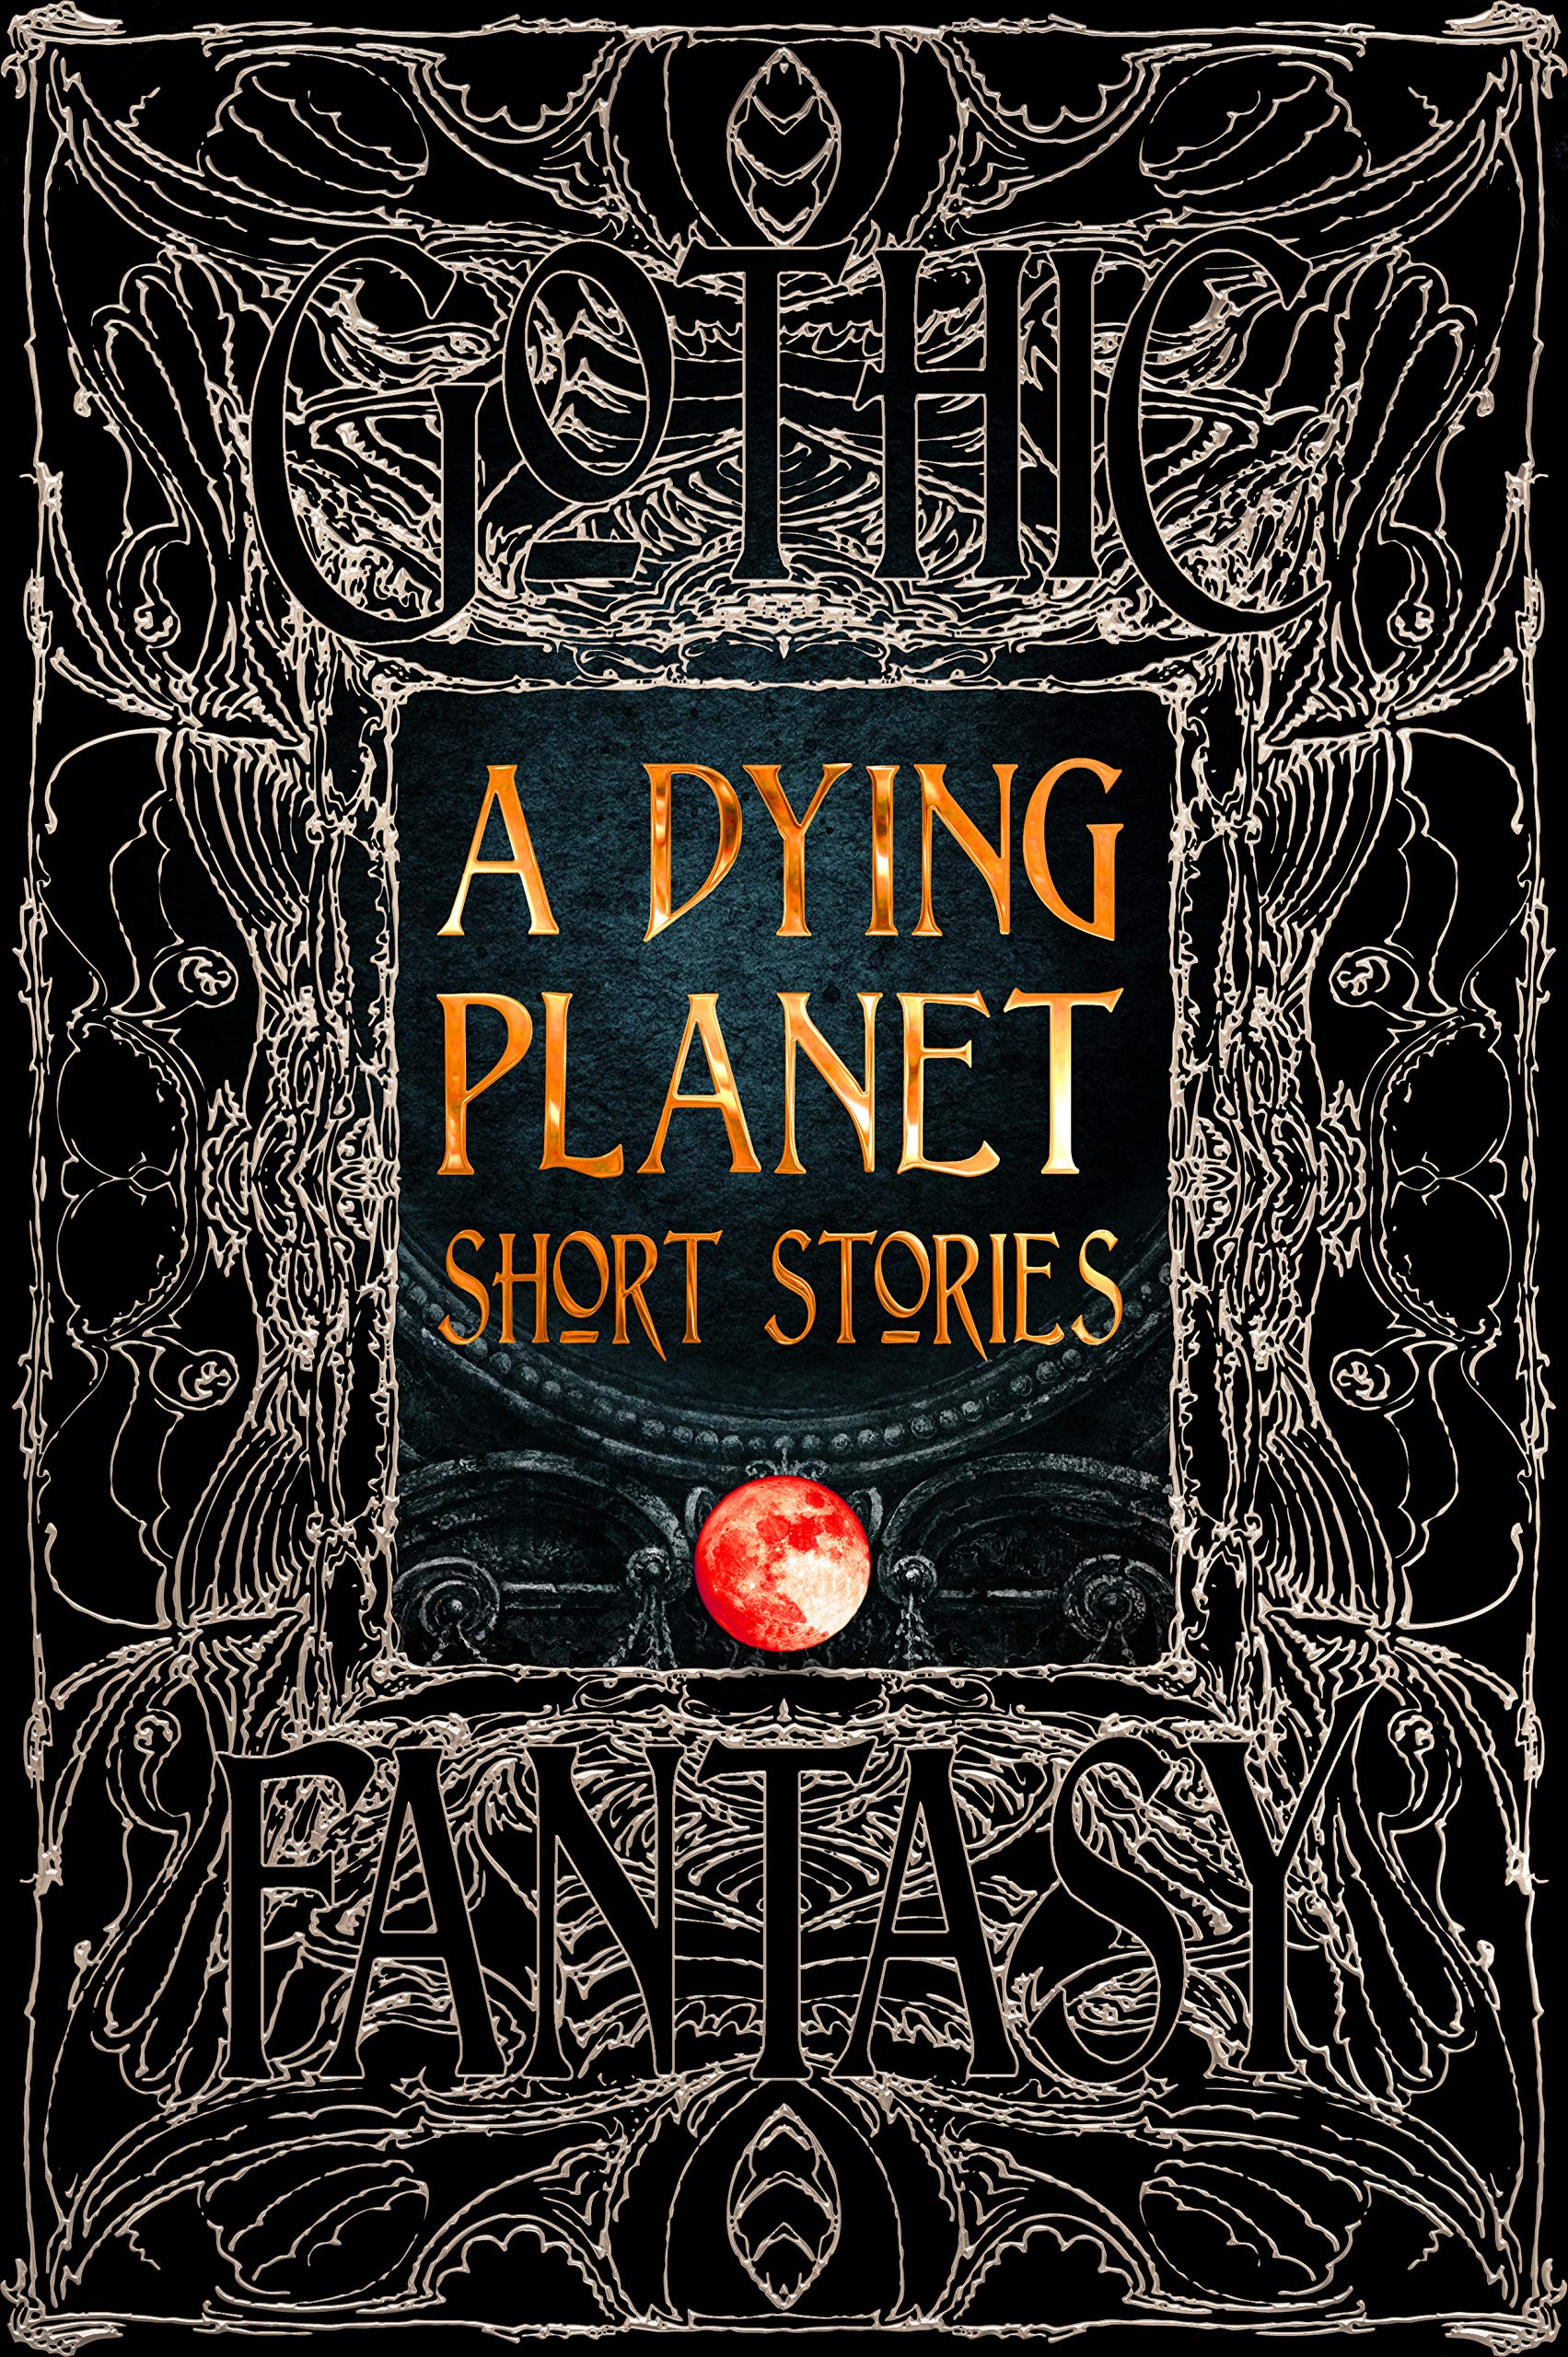 Dying Planet Short Stories |